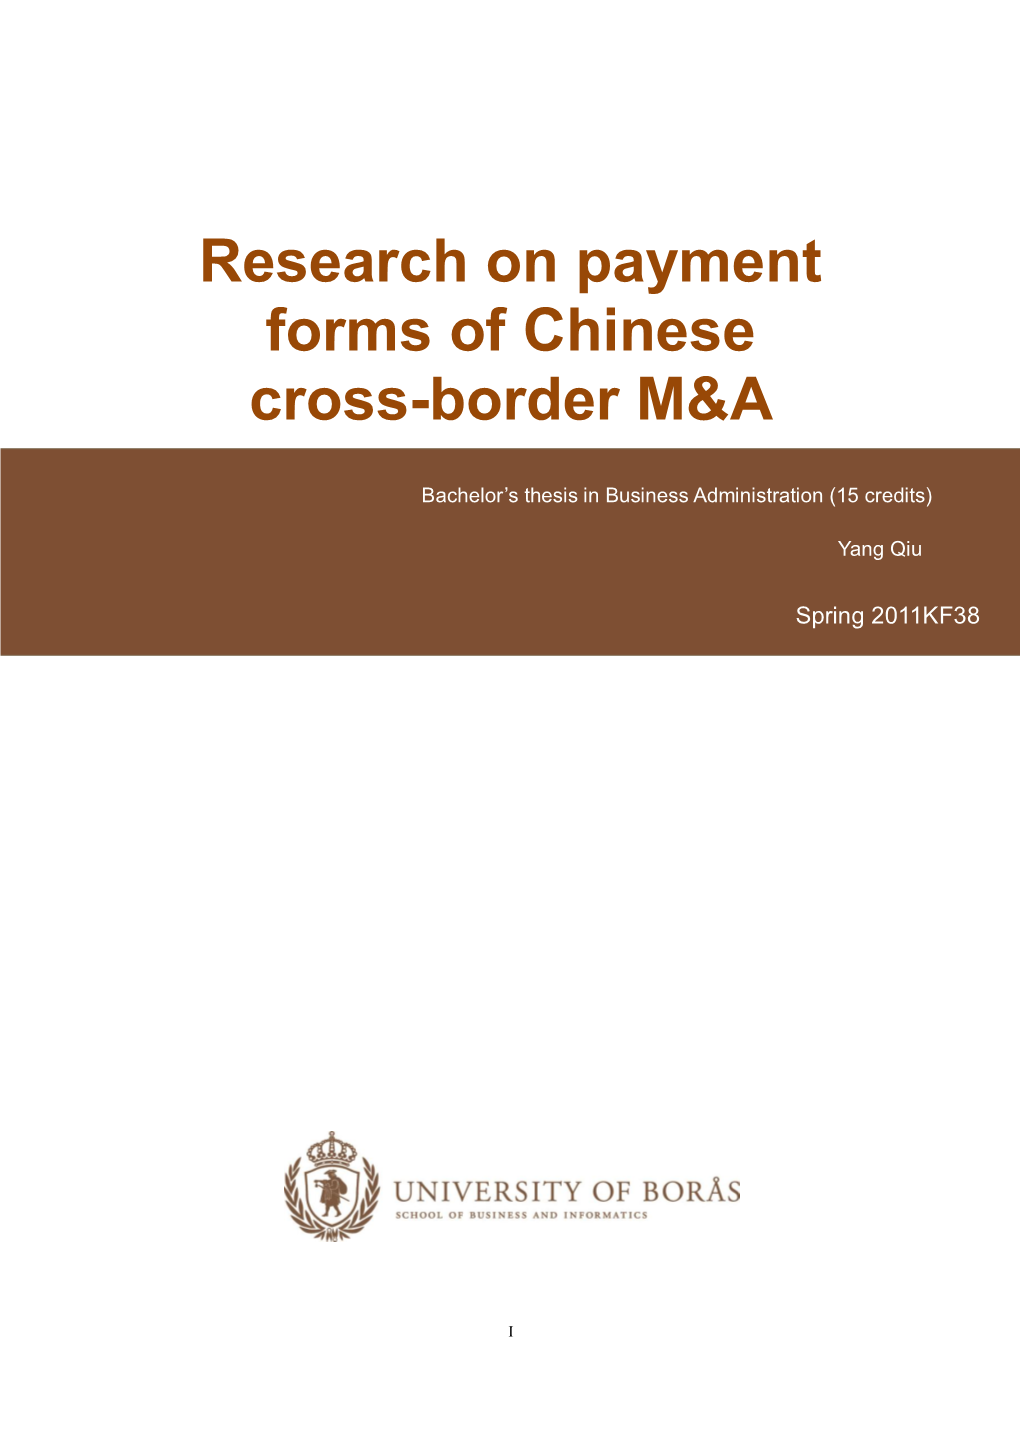 Research on Payment Forms of Chinese Cross-Border M&A